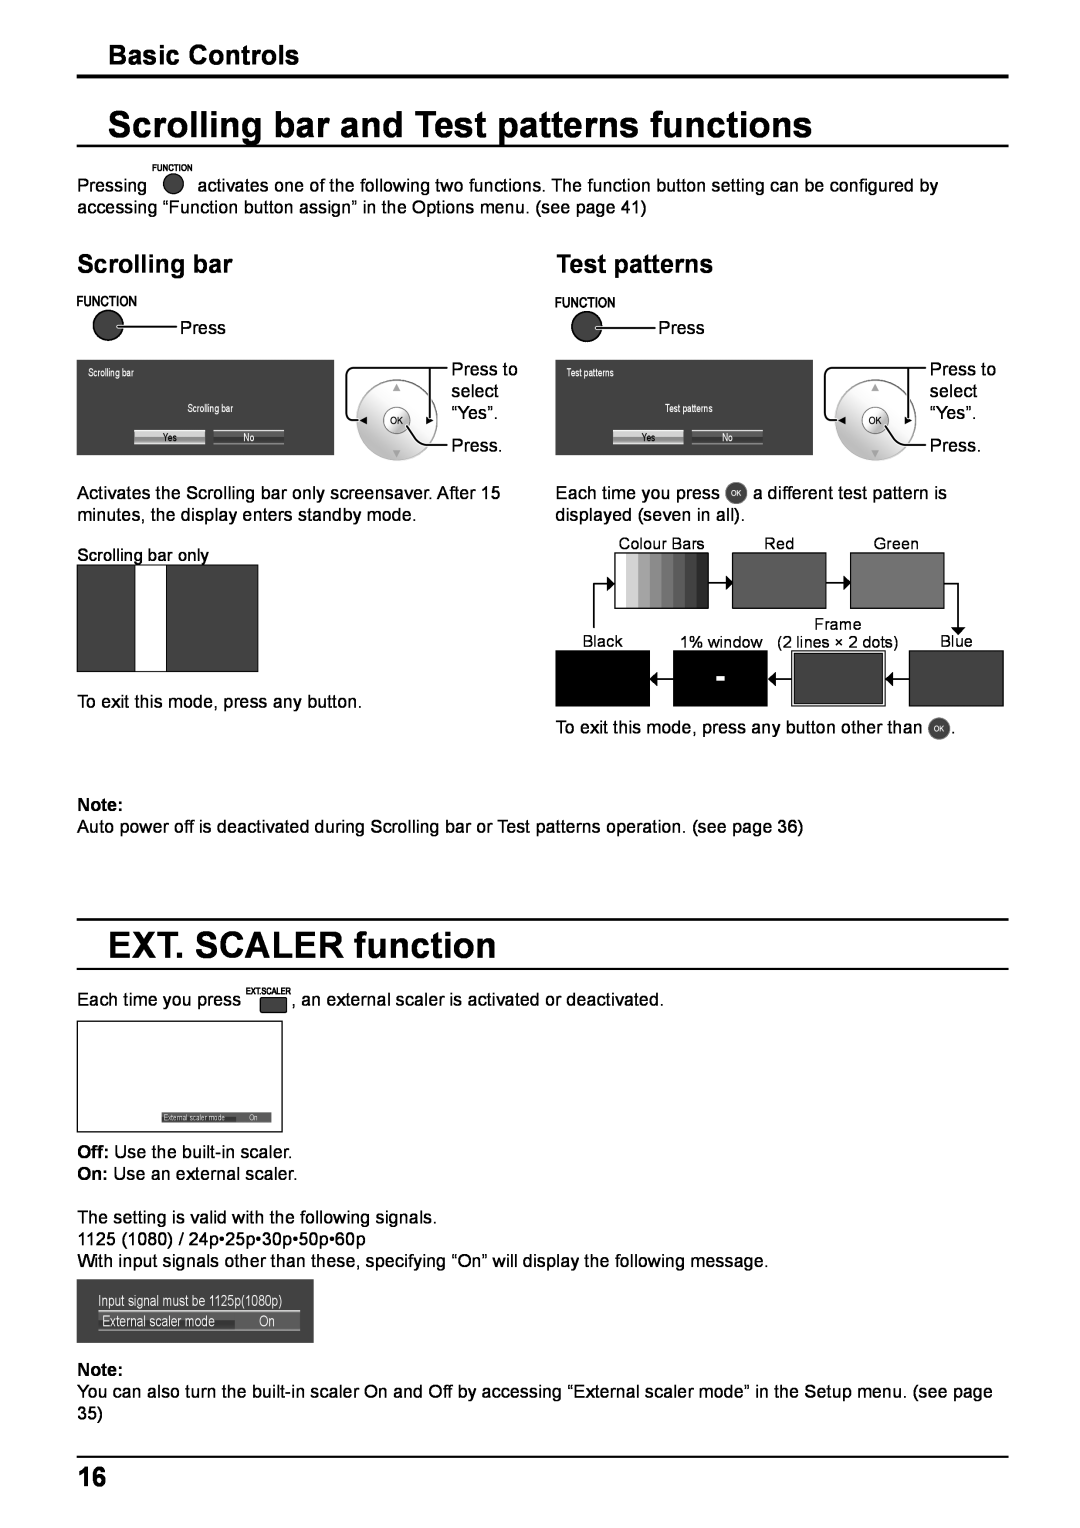 Panasonic TH-65VX100E, TH-50VX100E Scrolling bar and Test patterns functions, EXT. SCALER function, Basic Controls 